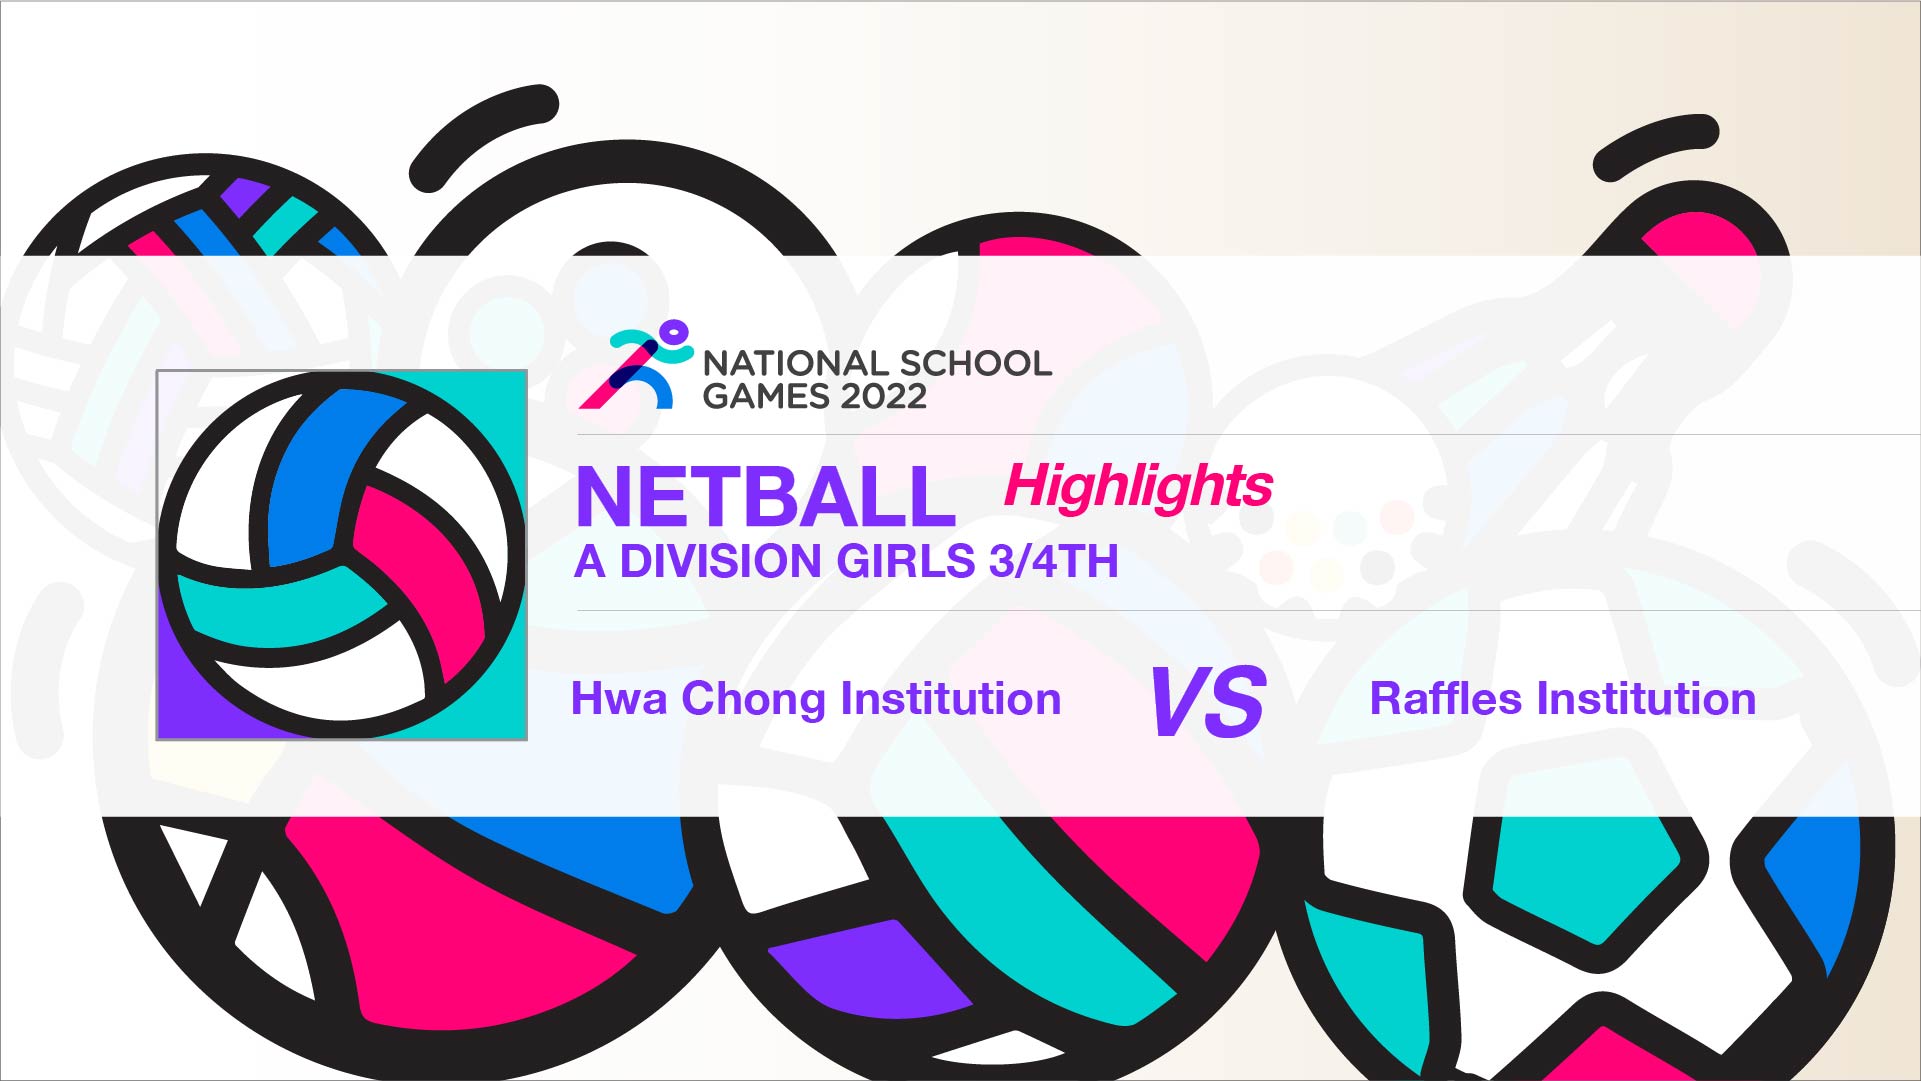 SSSC Netball A Division Girls (3/4th) | Hwa Chong Institution vs Raffles Institution - Highlights